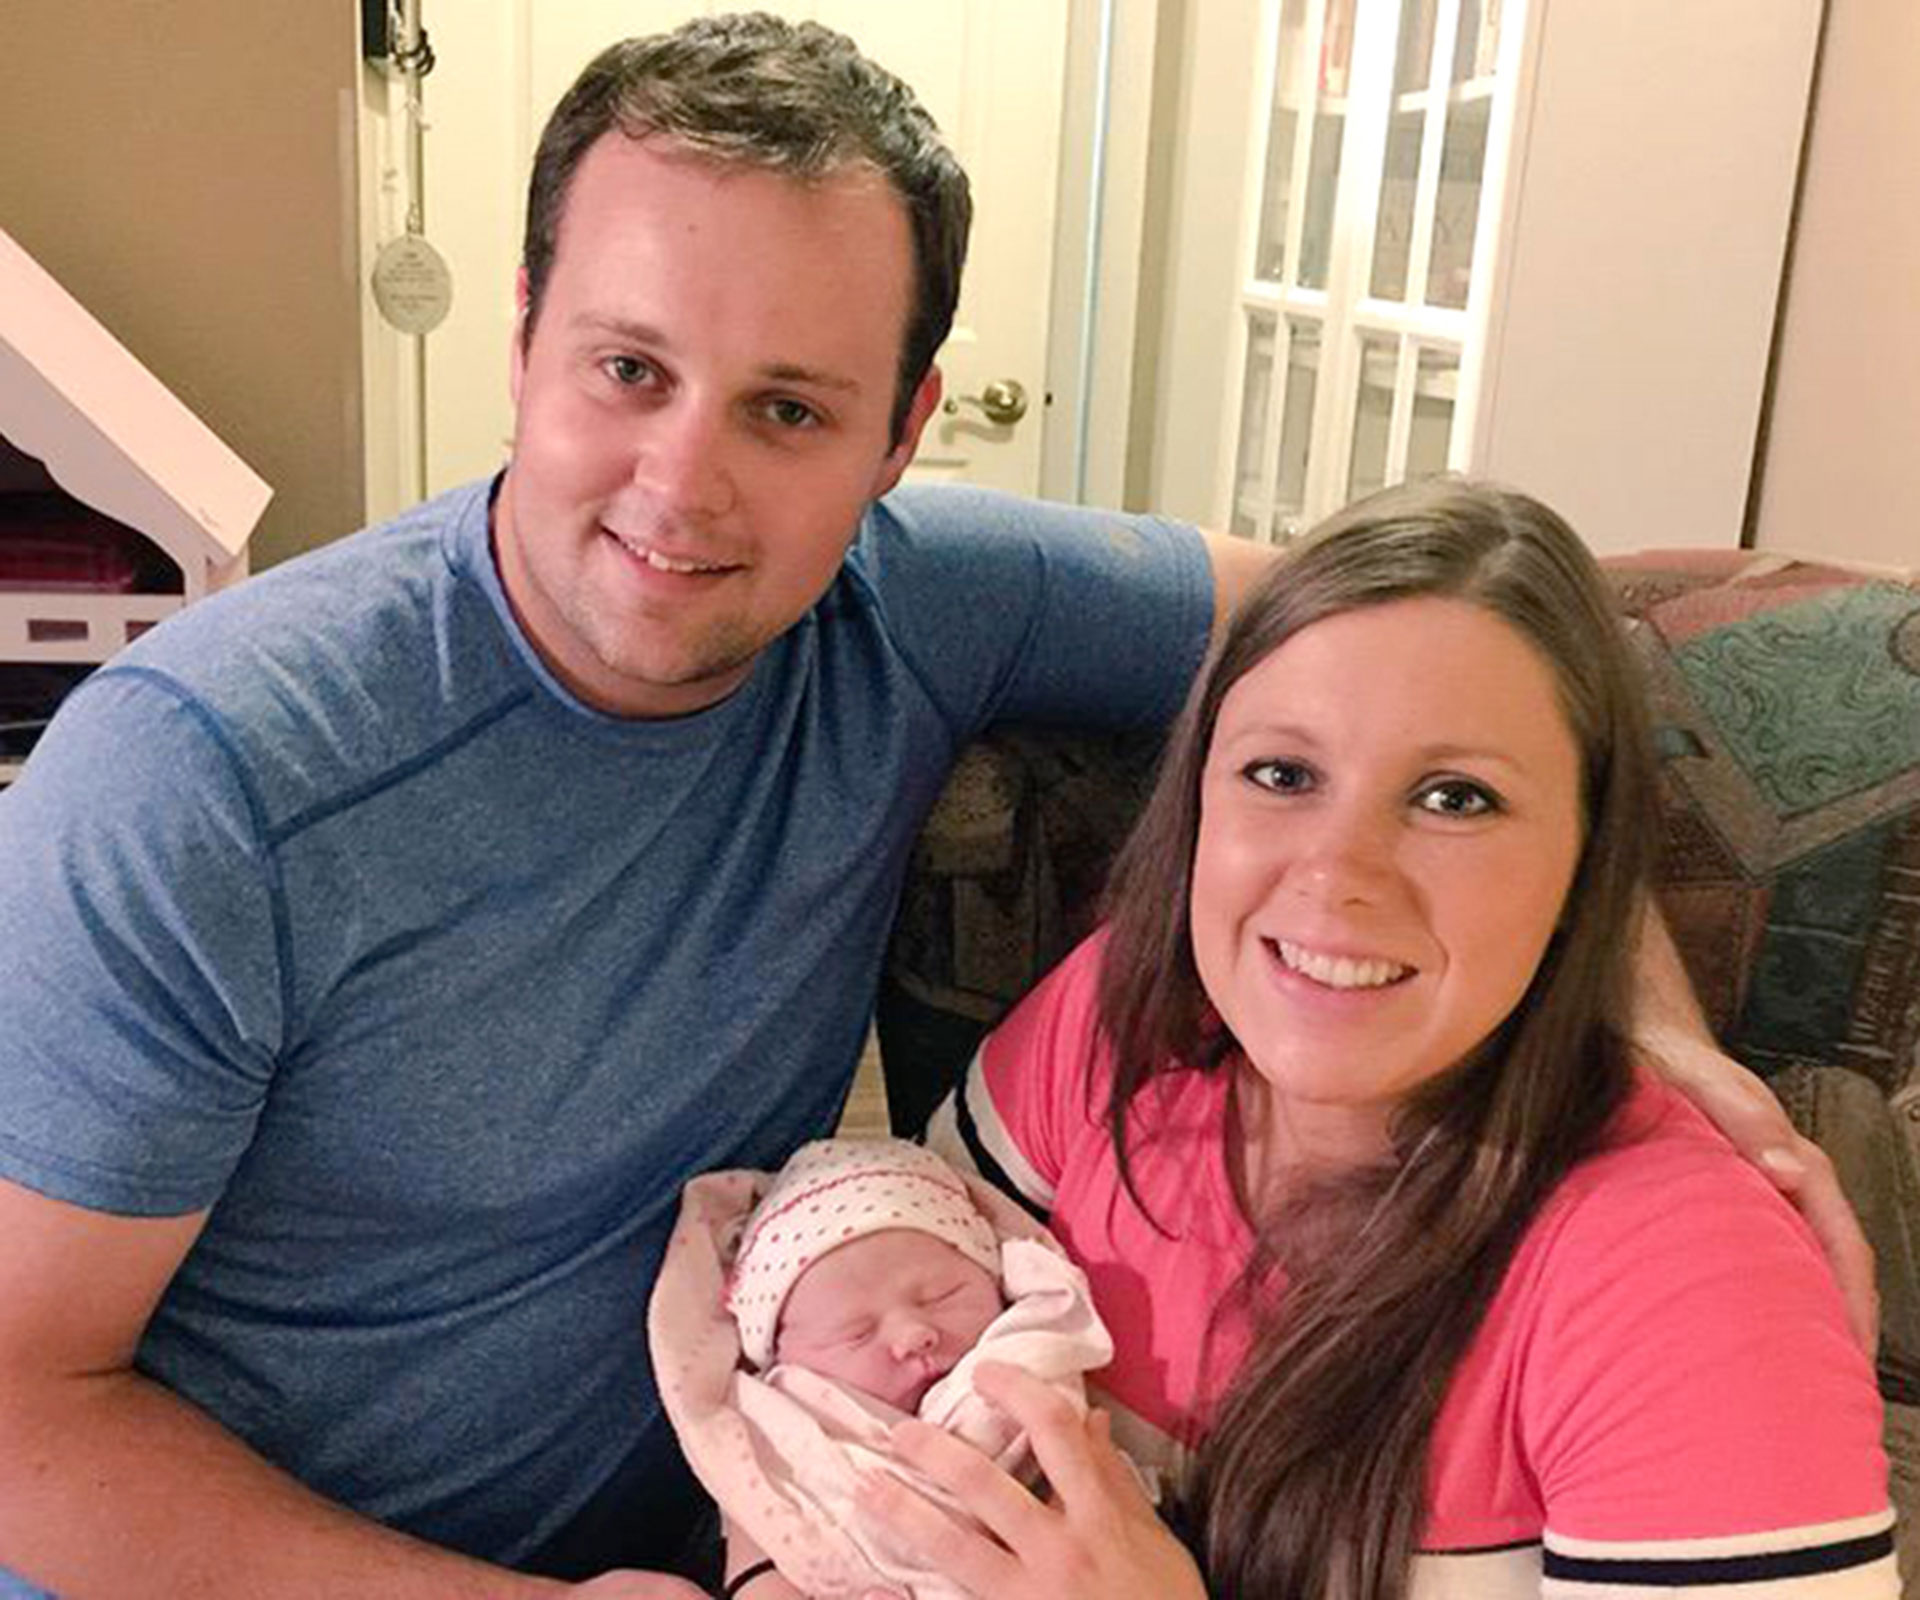 Anger is ‘not godly’:Josh Duggar forgiven by wife